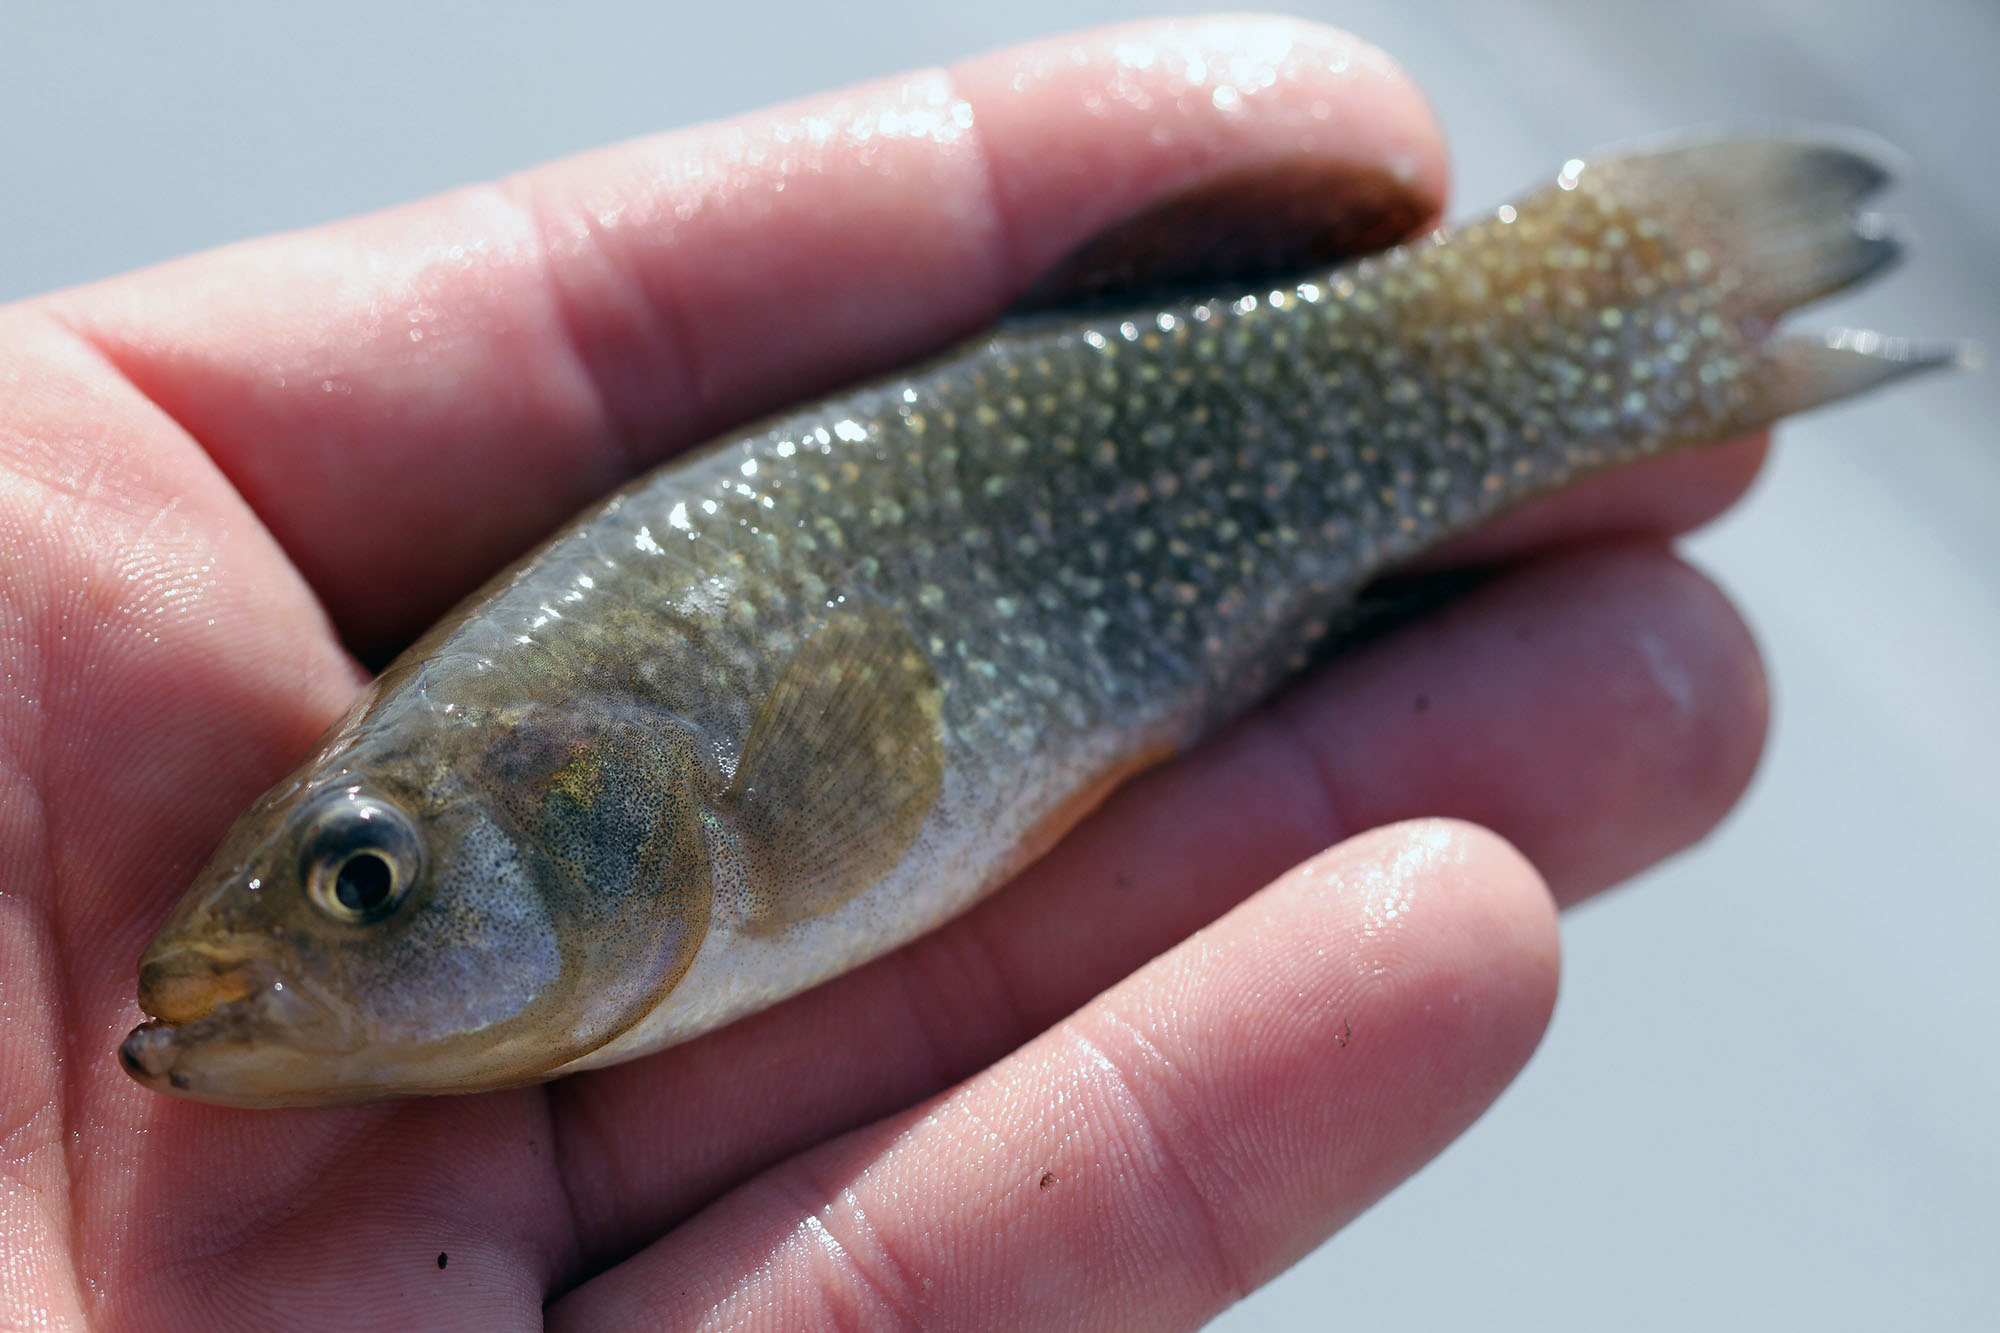 Killifish – The “White Mouse” of Marine Science – in Gulf Oil